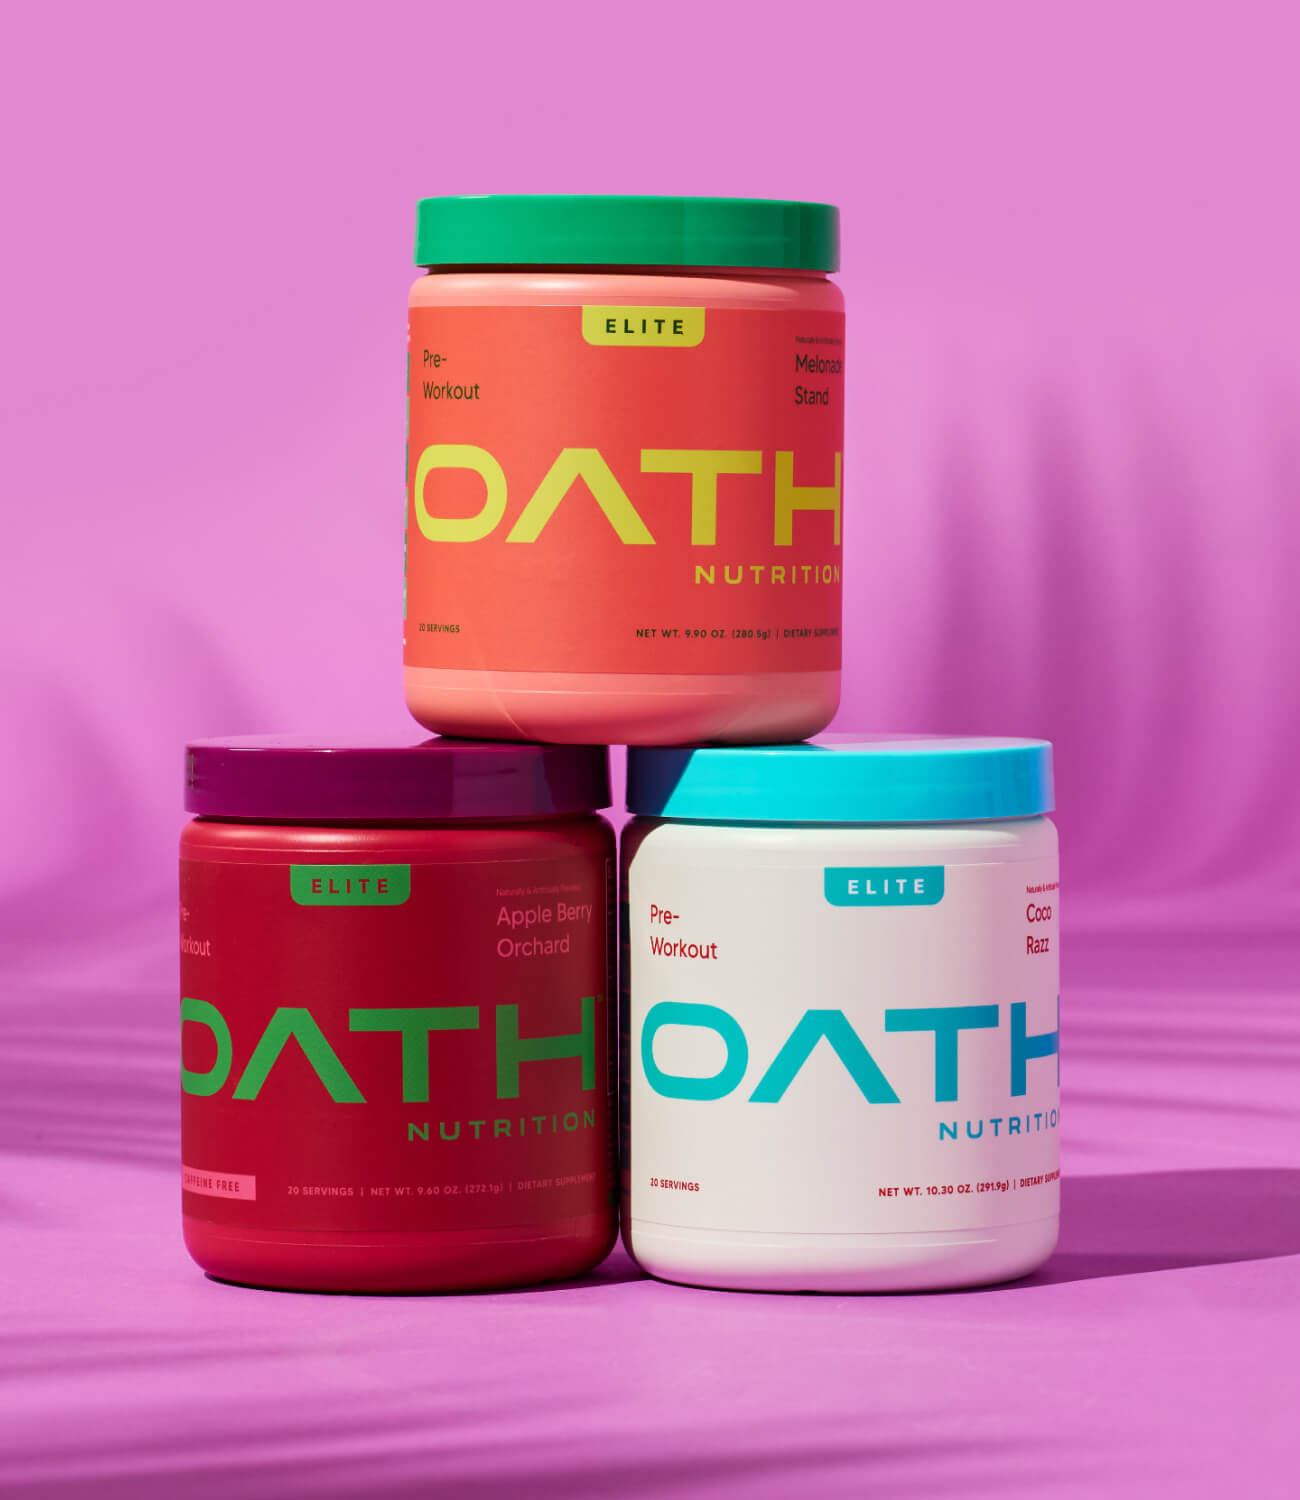 Oath Elite Pre-Workout with 5g of Creatine